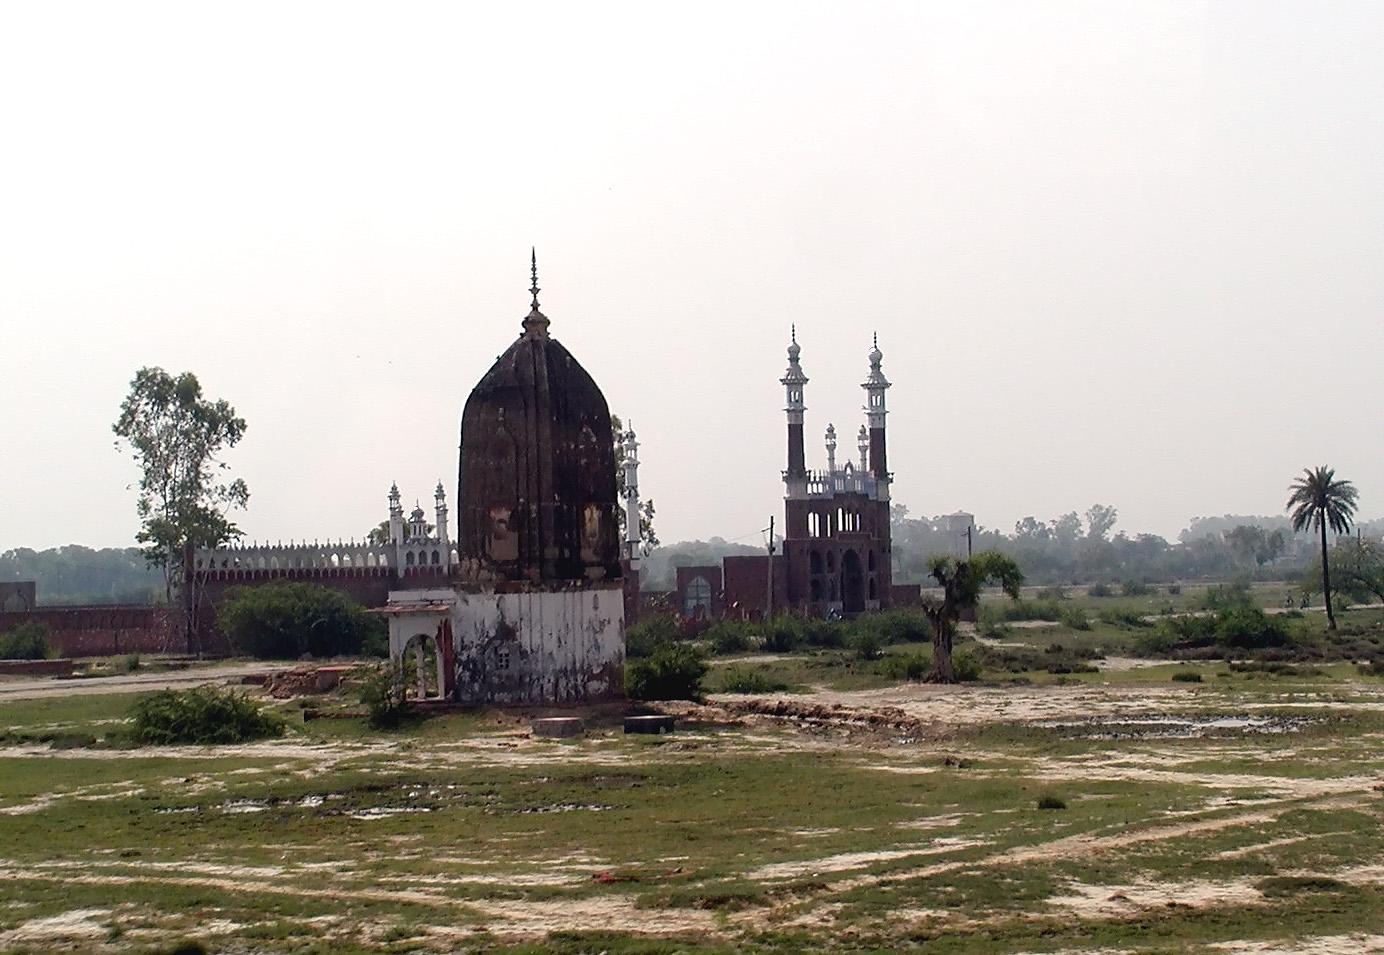 10-Jun-2001 09:26 - On the road to Agra - Unidentified mosque